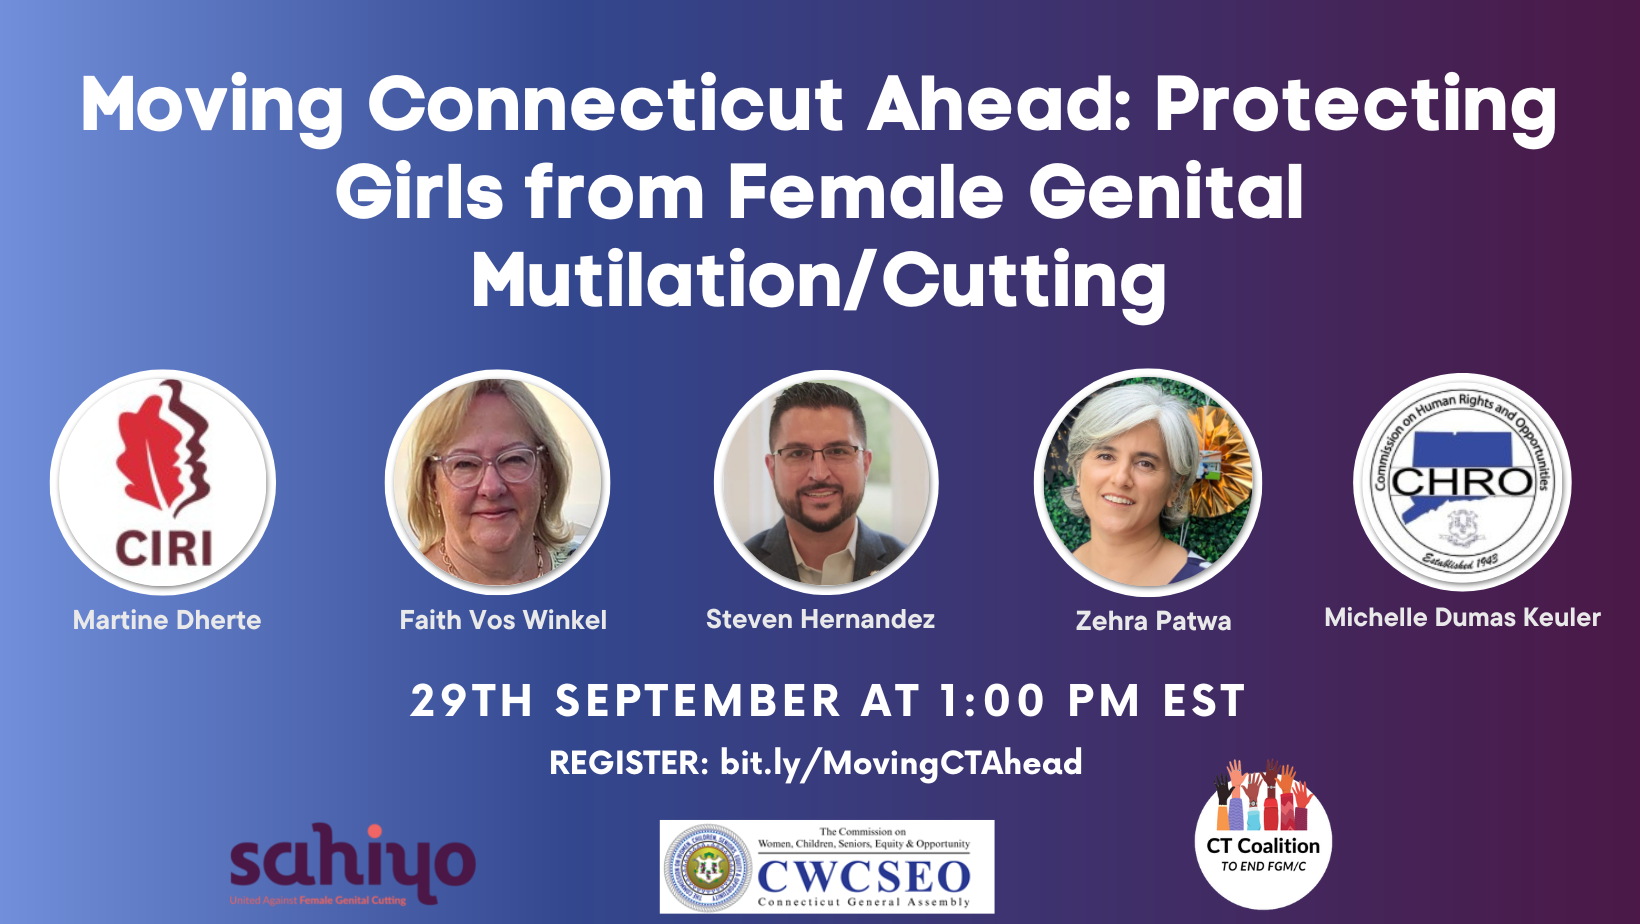 Reflecting on ‘Moving Connecticut Ahead: Protecting Girls from FGM/C’, a webinar